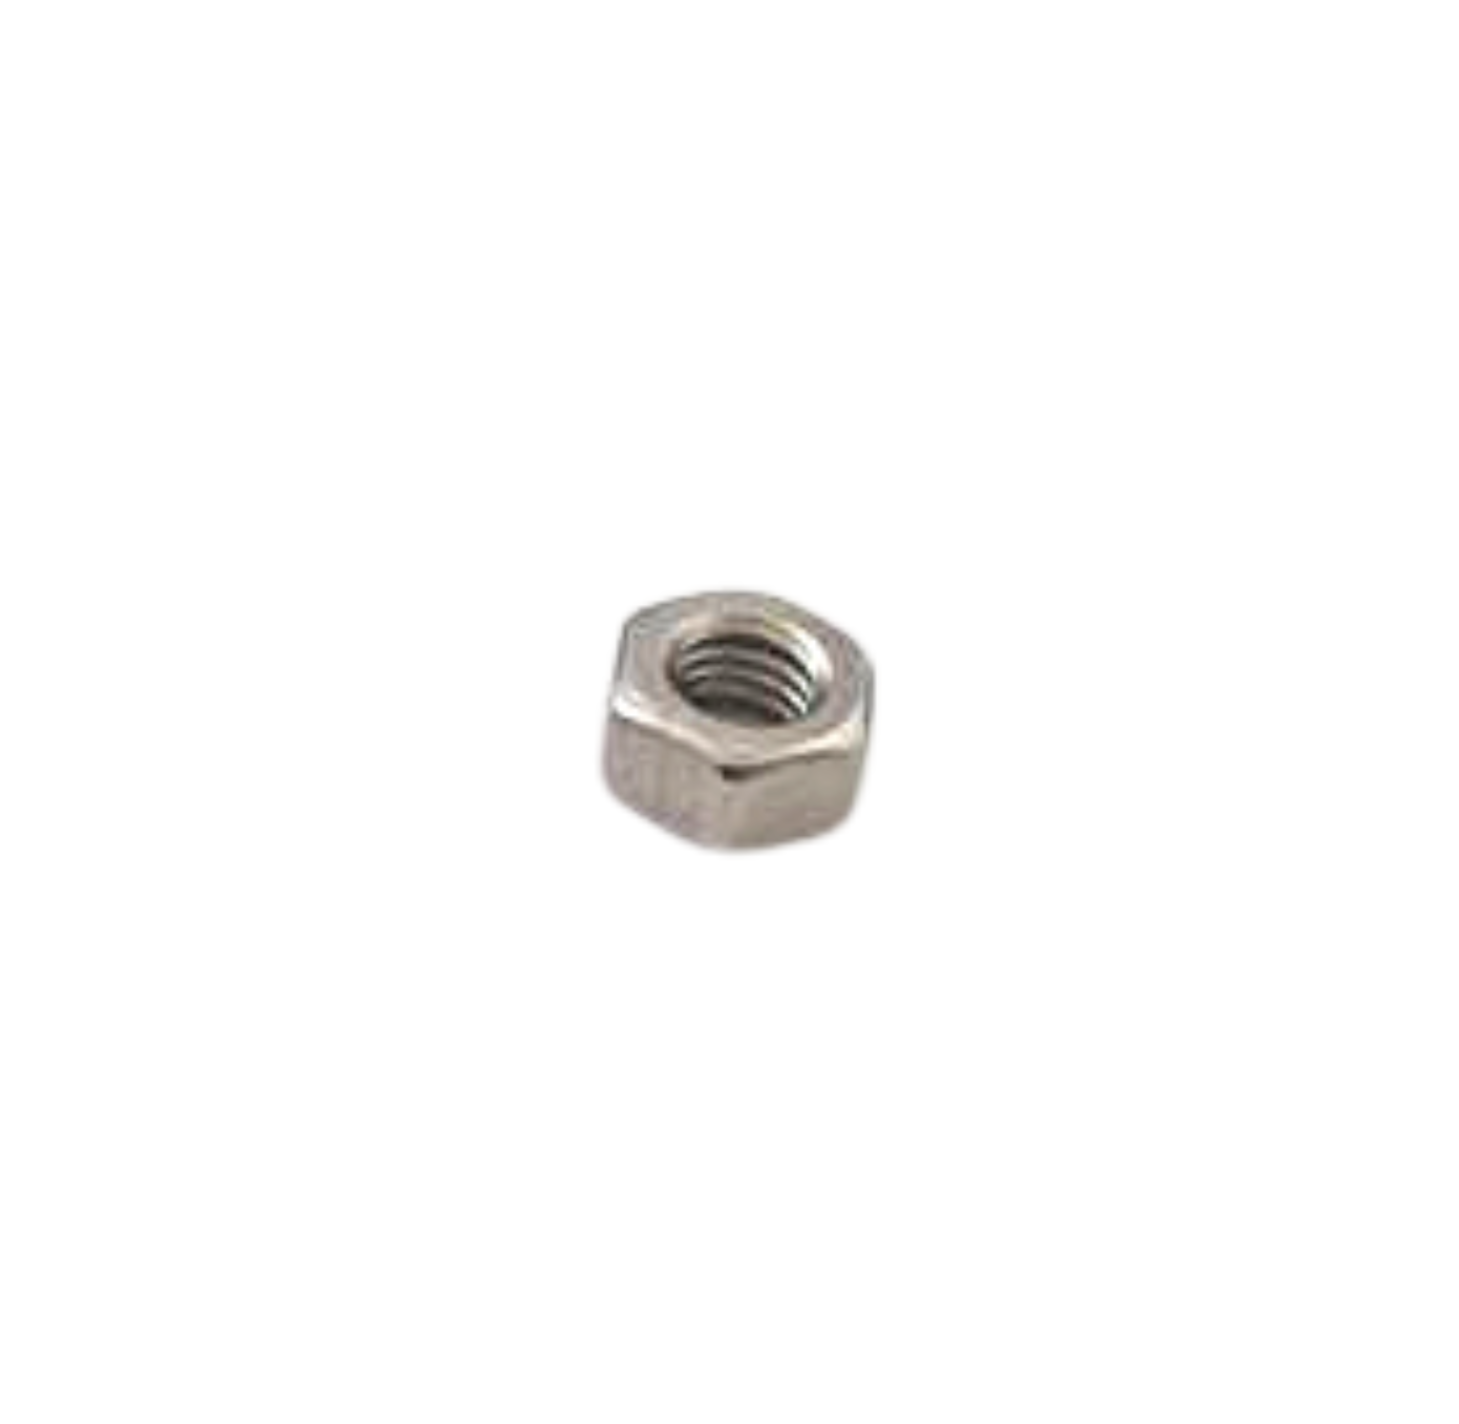 Hex Nut with 6mm thread